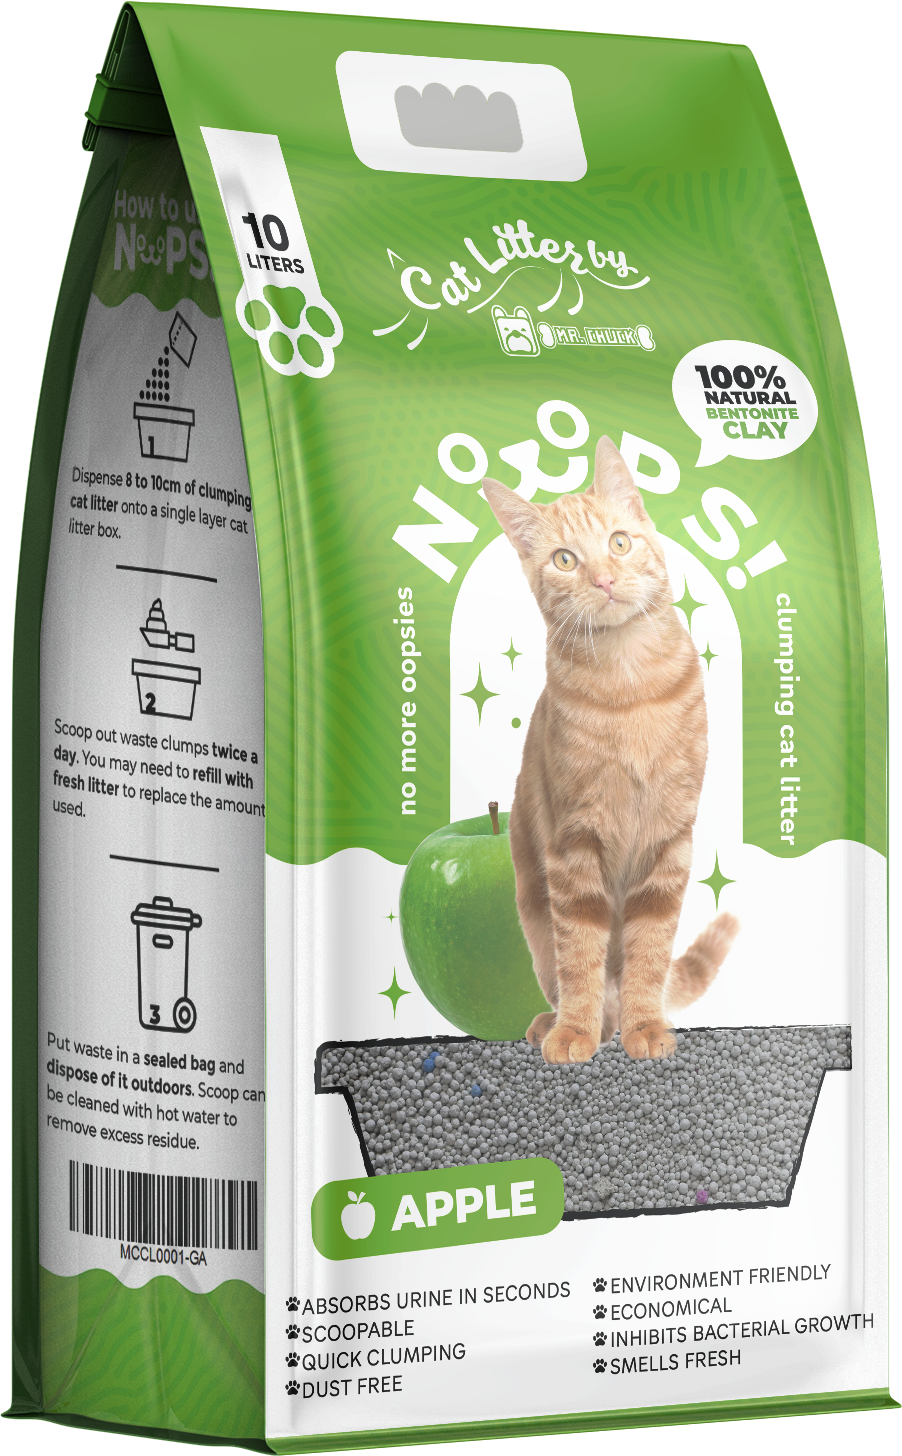 NOOPS! 10kg Clumping Cat Litter by Mr. Chuck AF Home